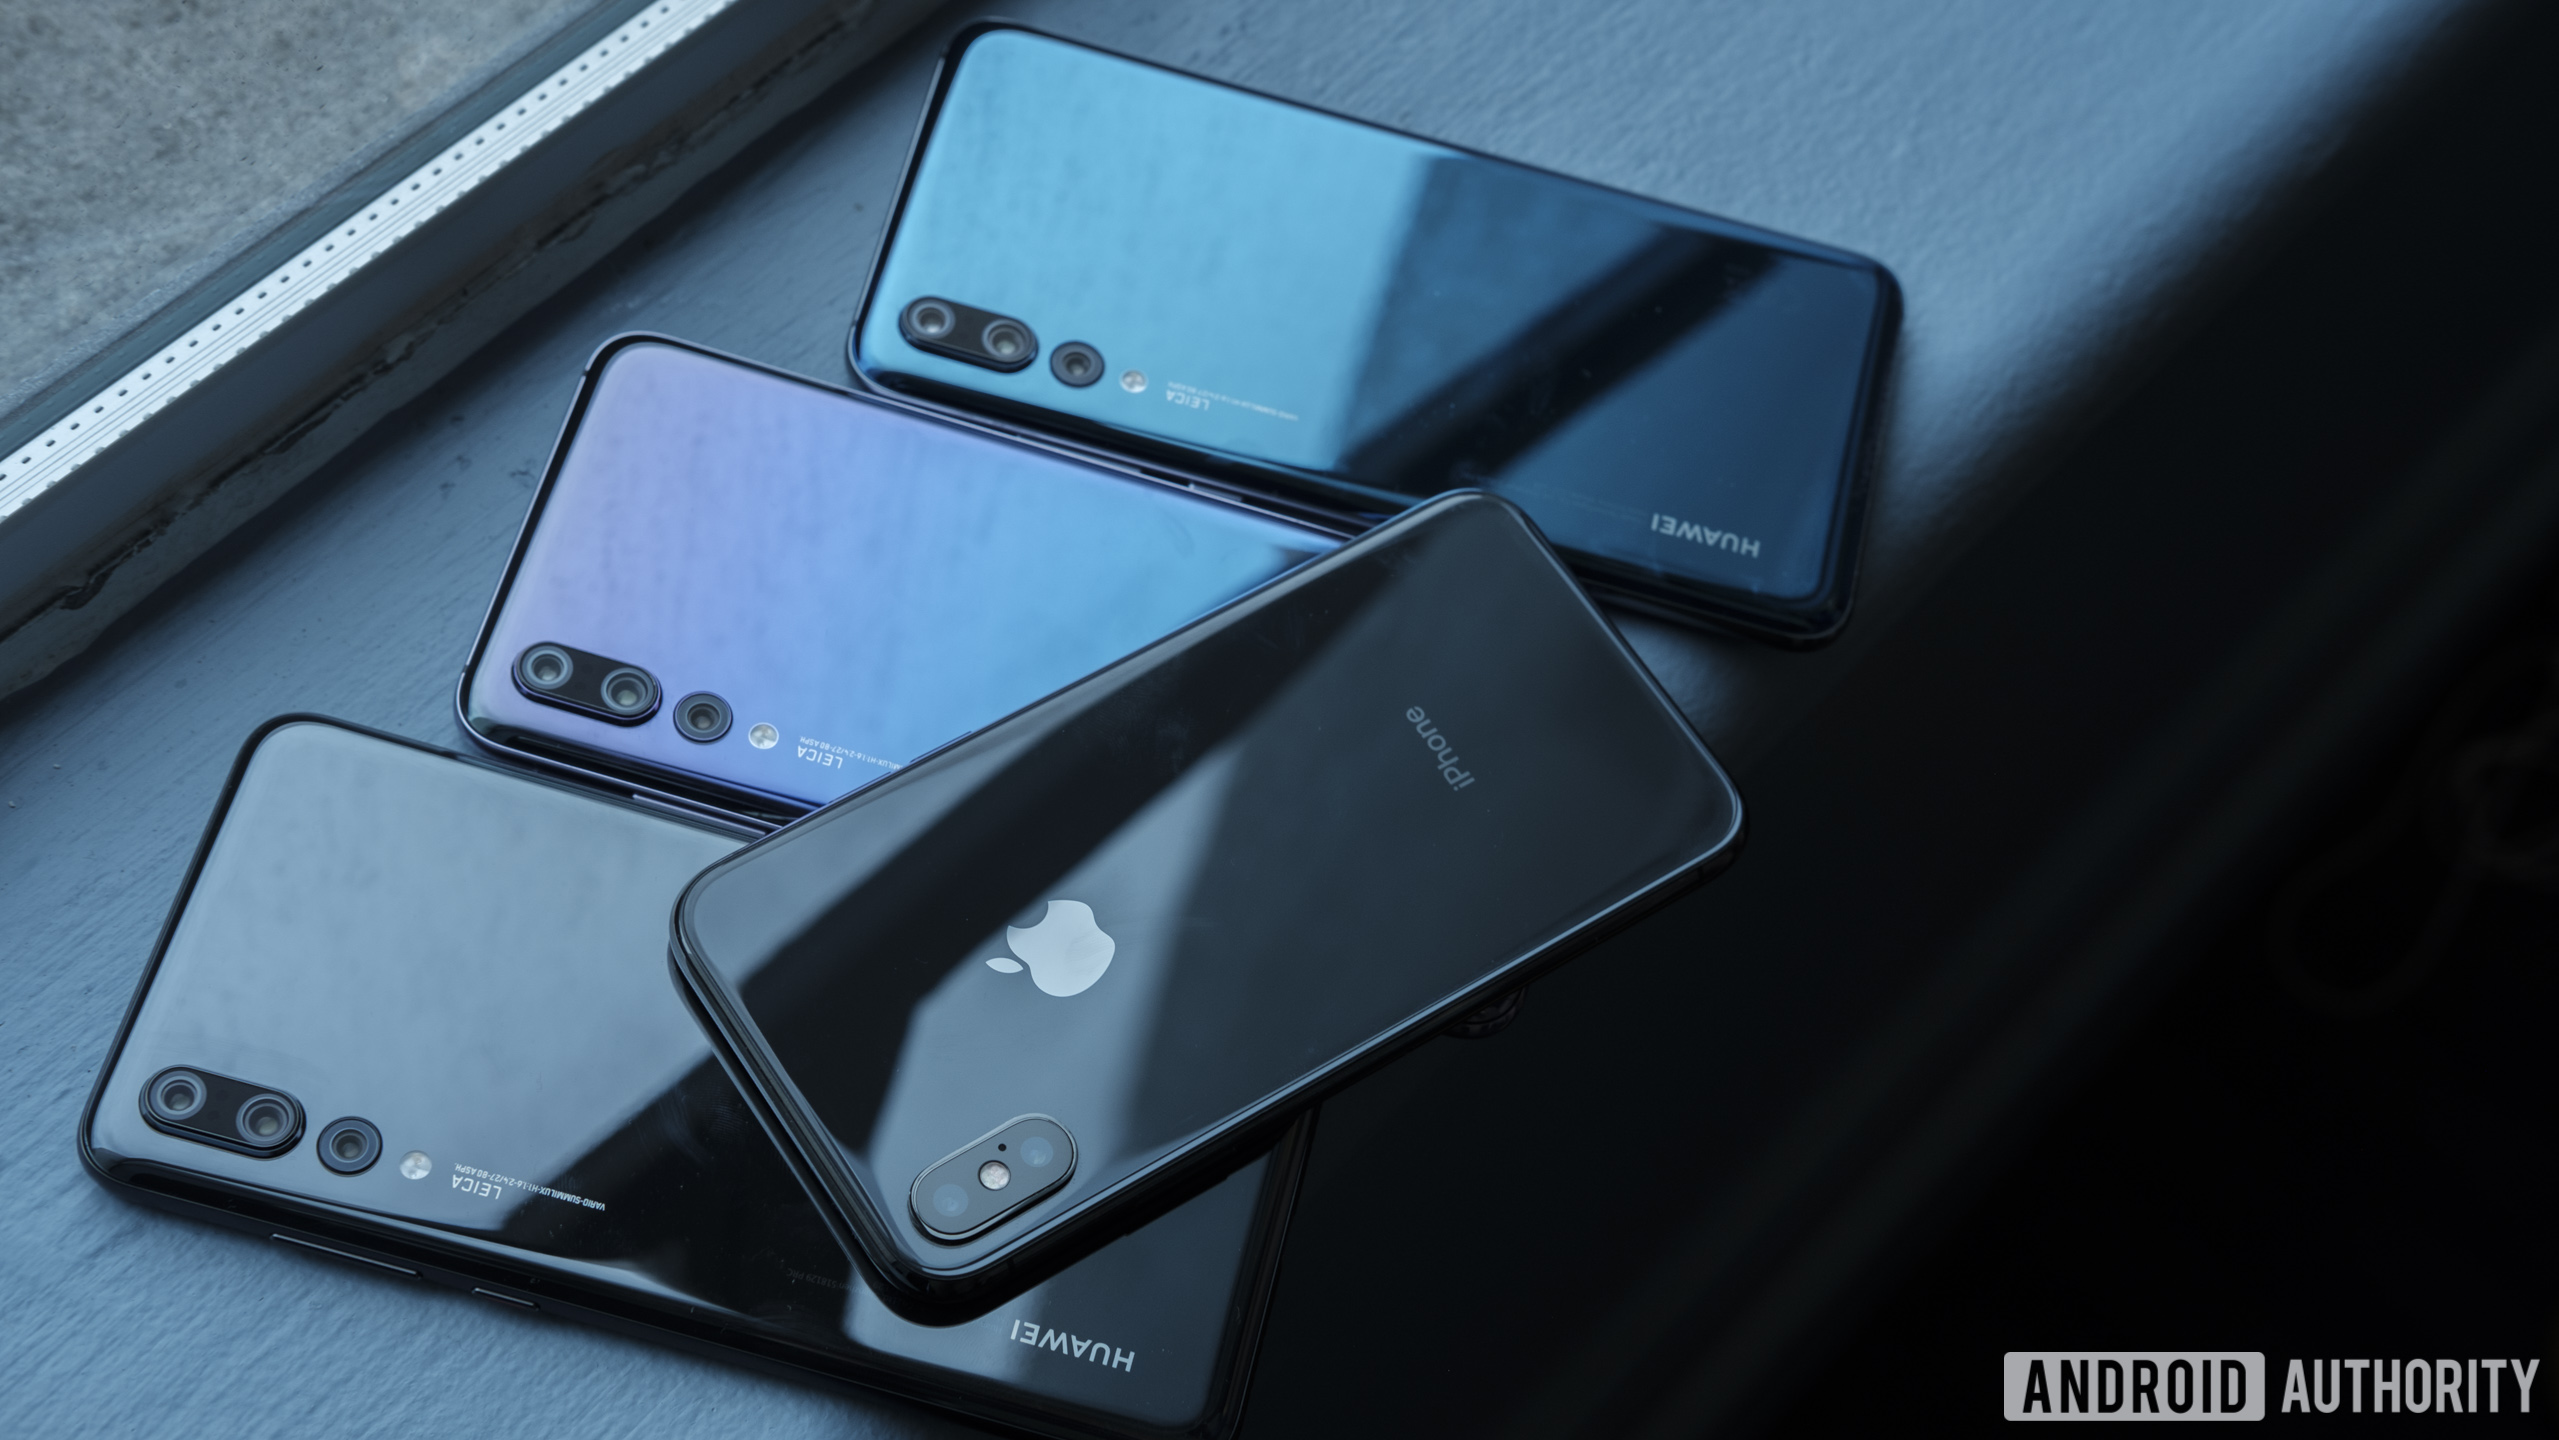 The Apple iPhone X on top of three Huawei P20 Pro smartphones on a window ledge.